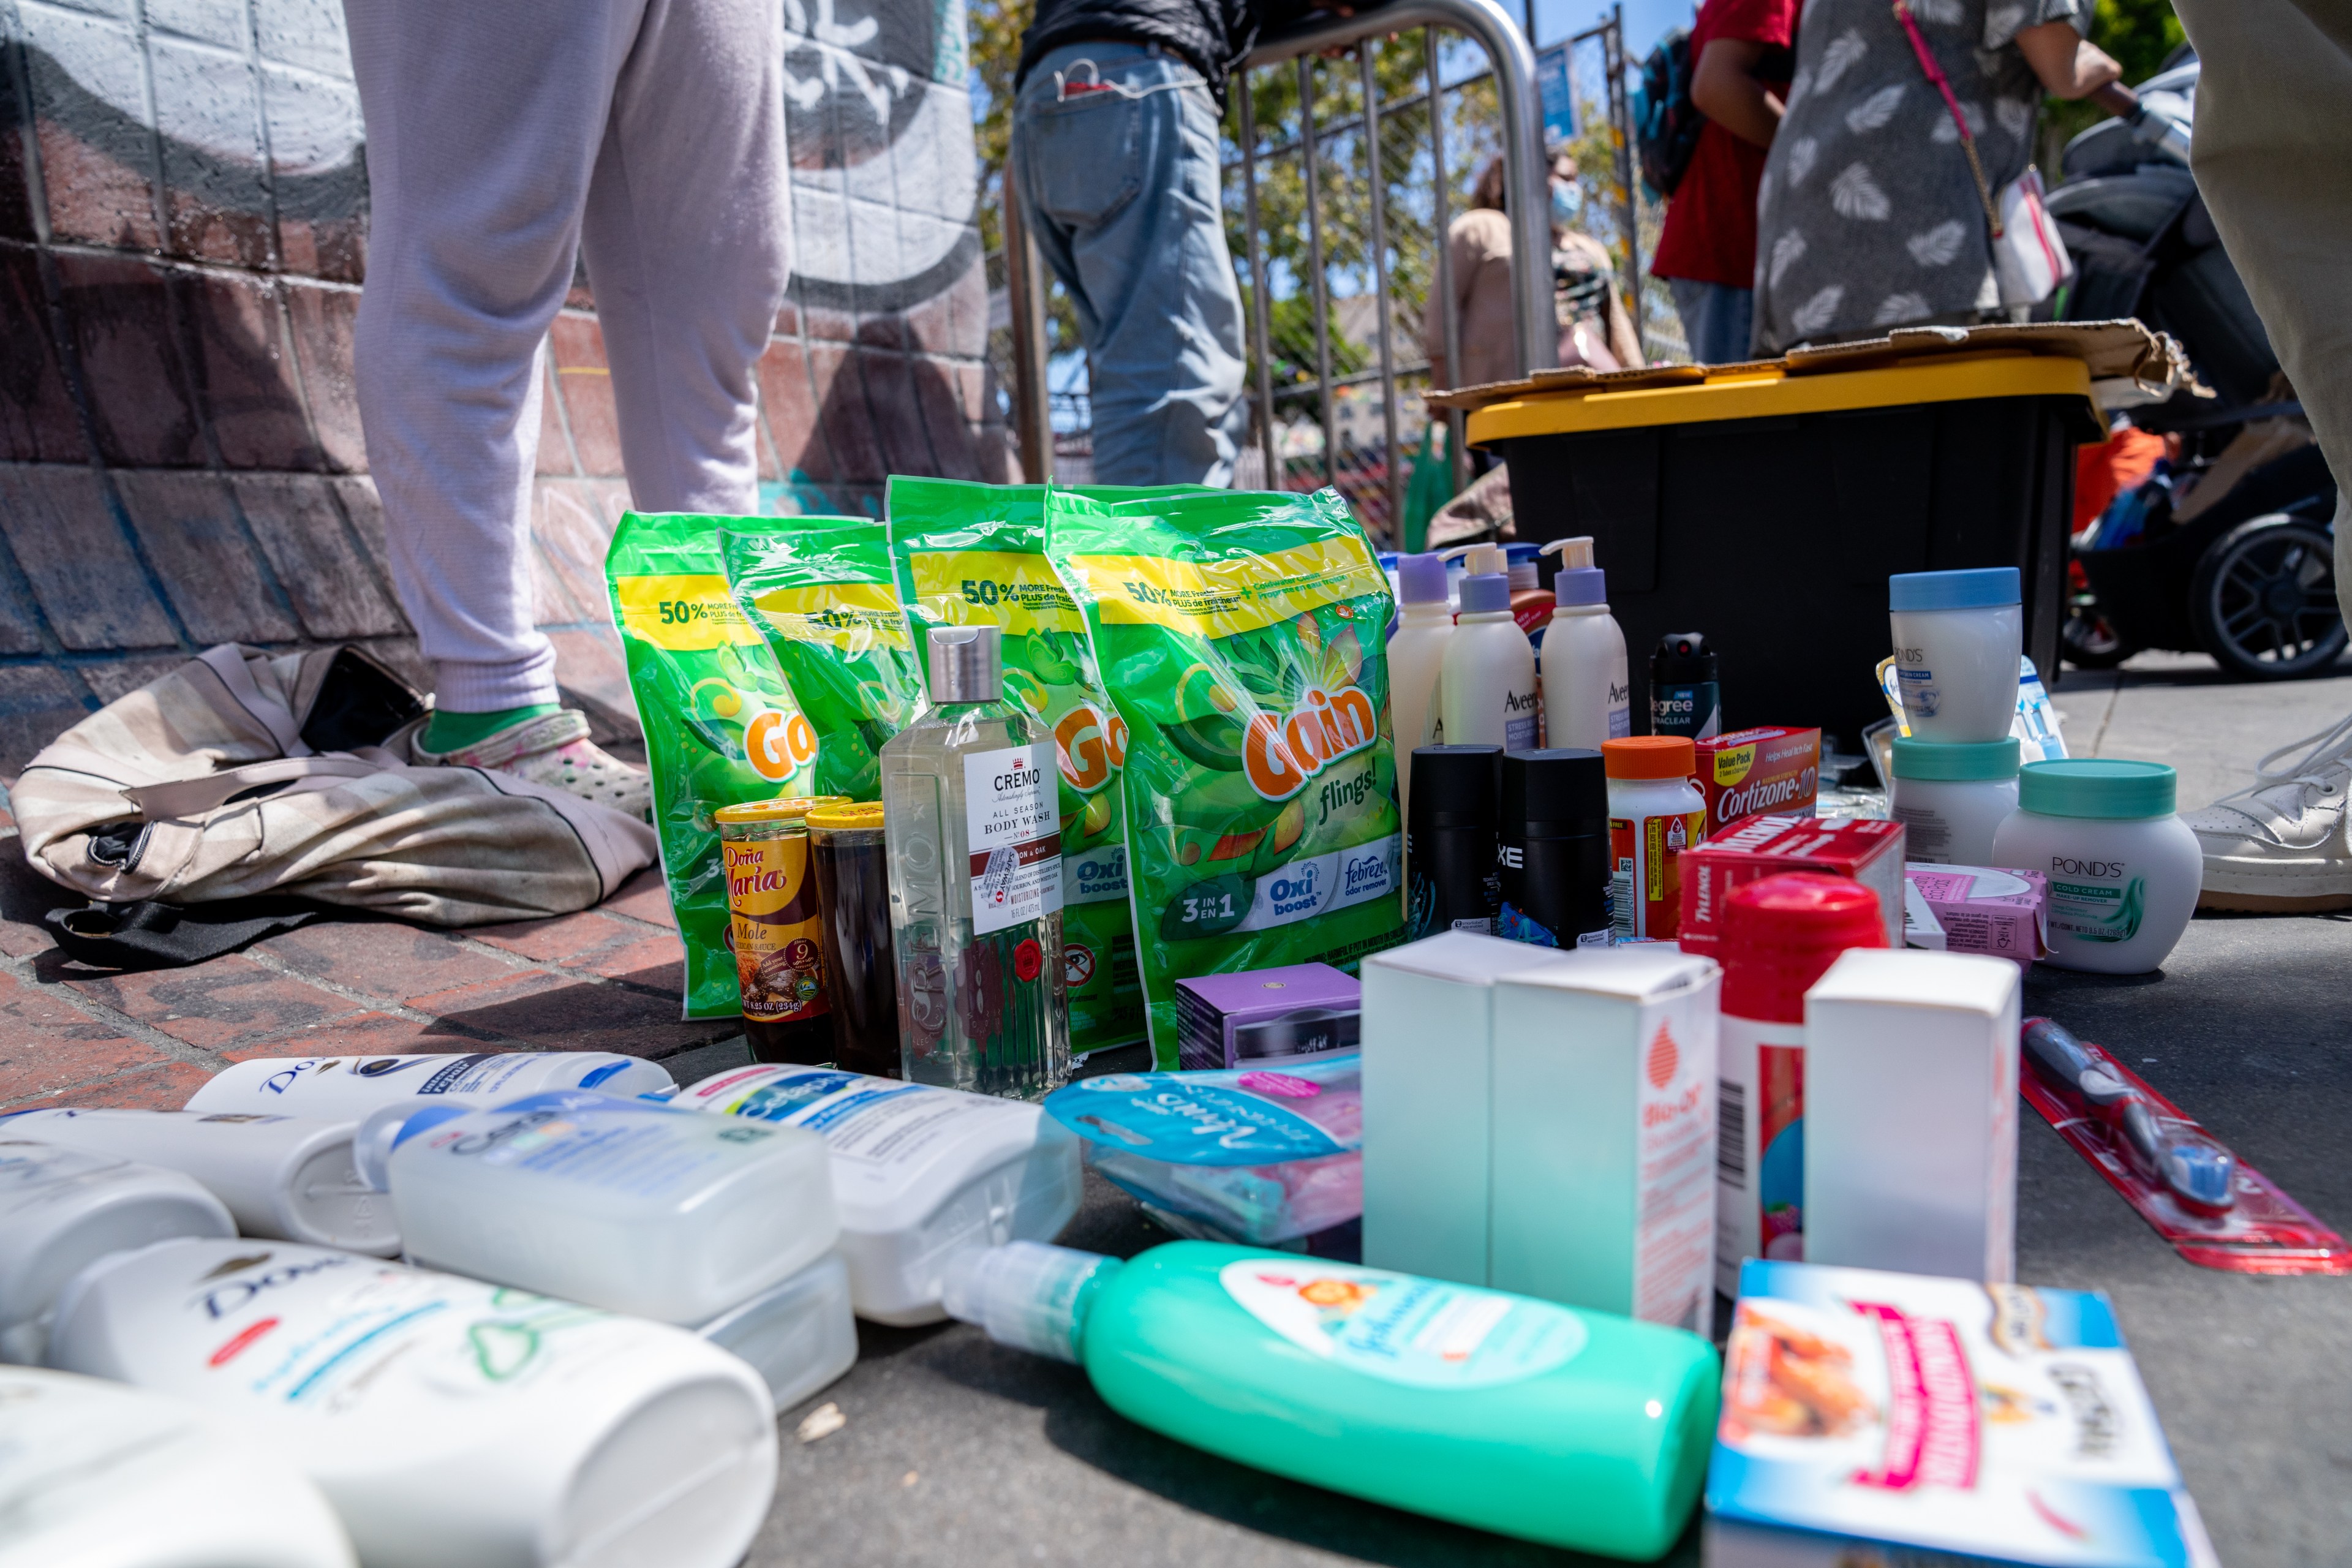 A photo of shampoos, toothpaste, laundry detergent, and other goods is spread across the concrete sidewalk on Mission Street in San Francisco.